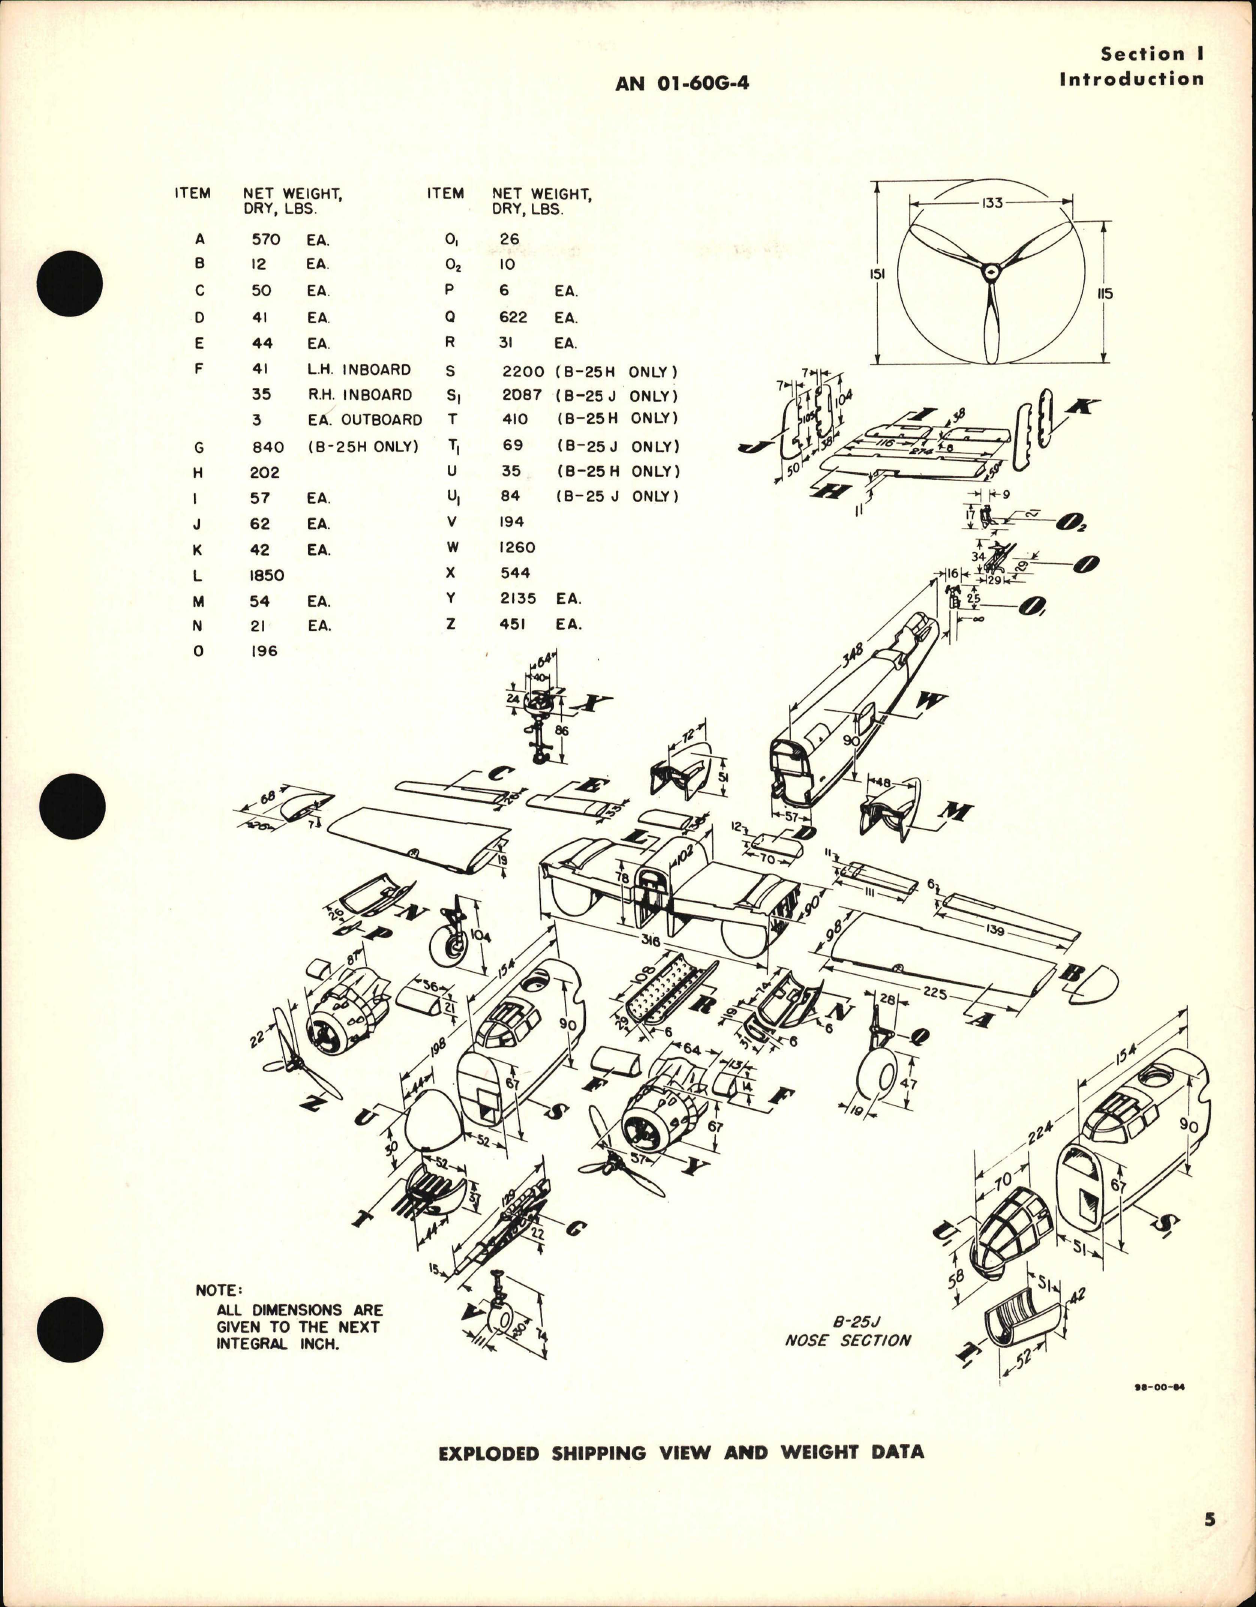 Sample page 7 from AirCorps Library document: Parts Catalog for B-25H, B-25J, and PBJ